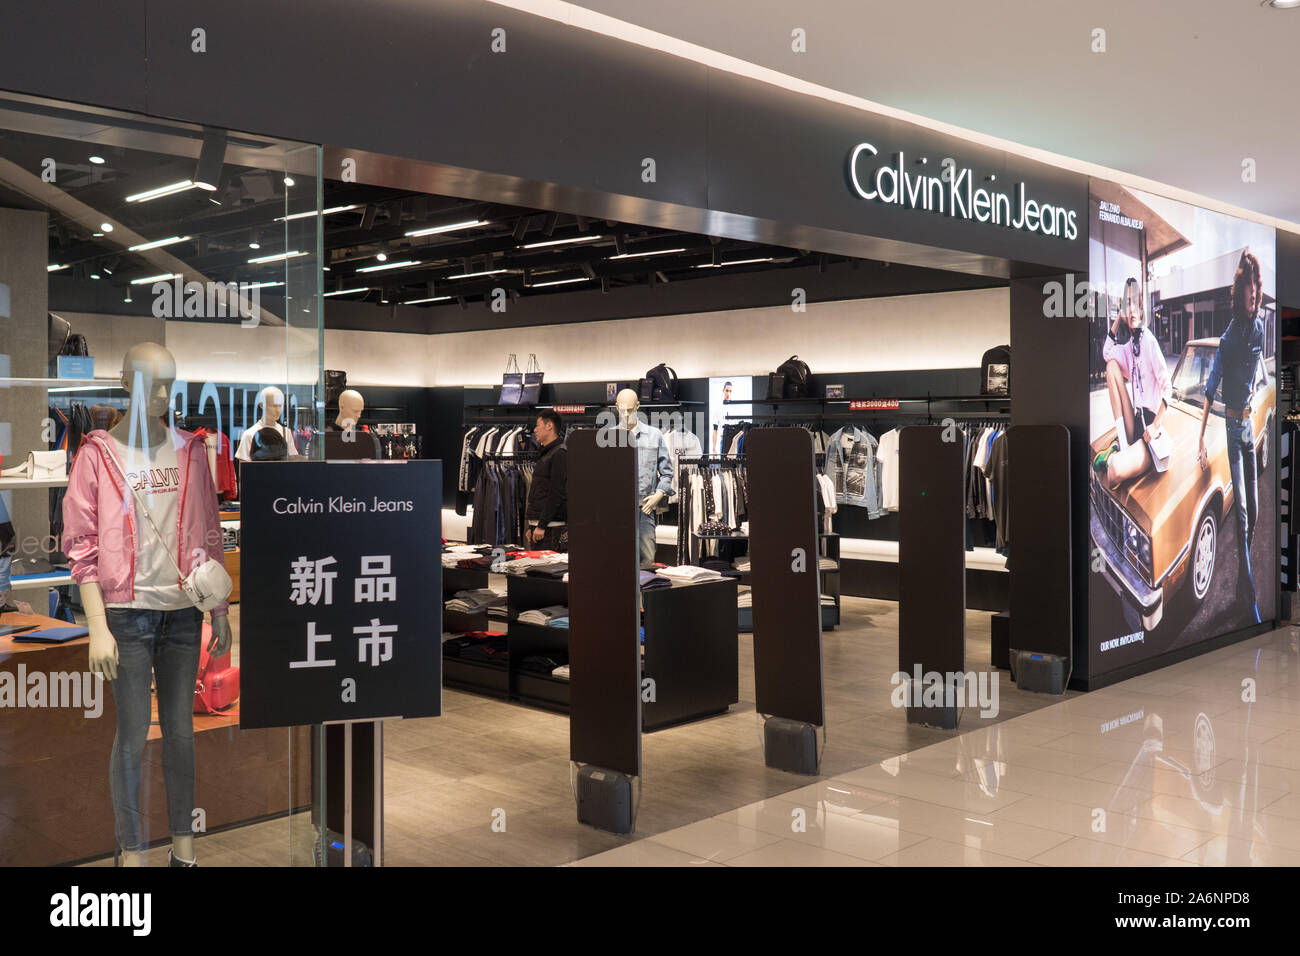 Calvin Klein Store Front Chinese Shopping mall, Dalian, China, April 2019 - Alamy